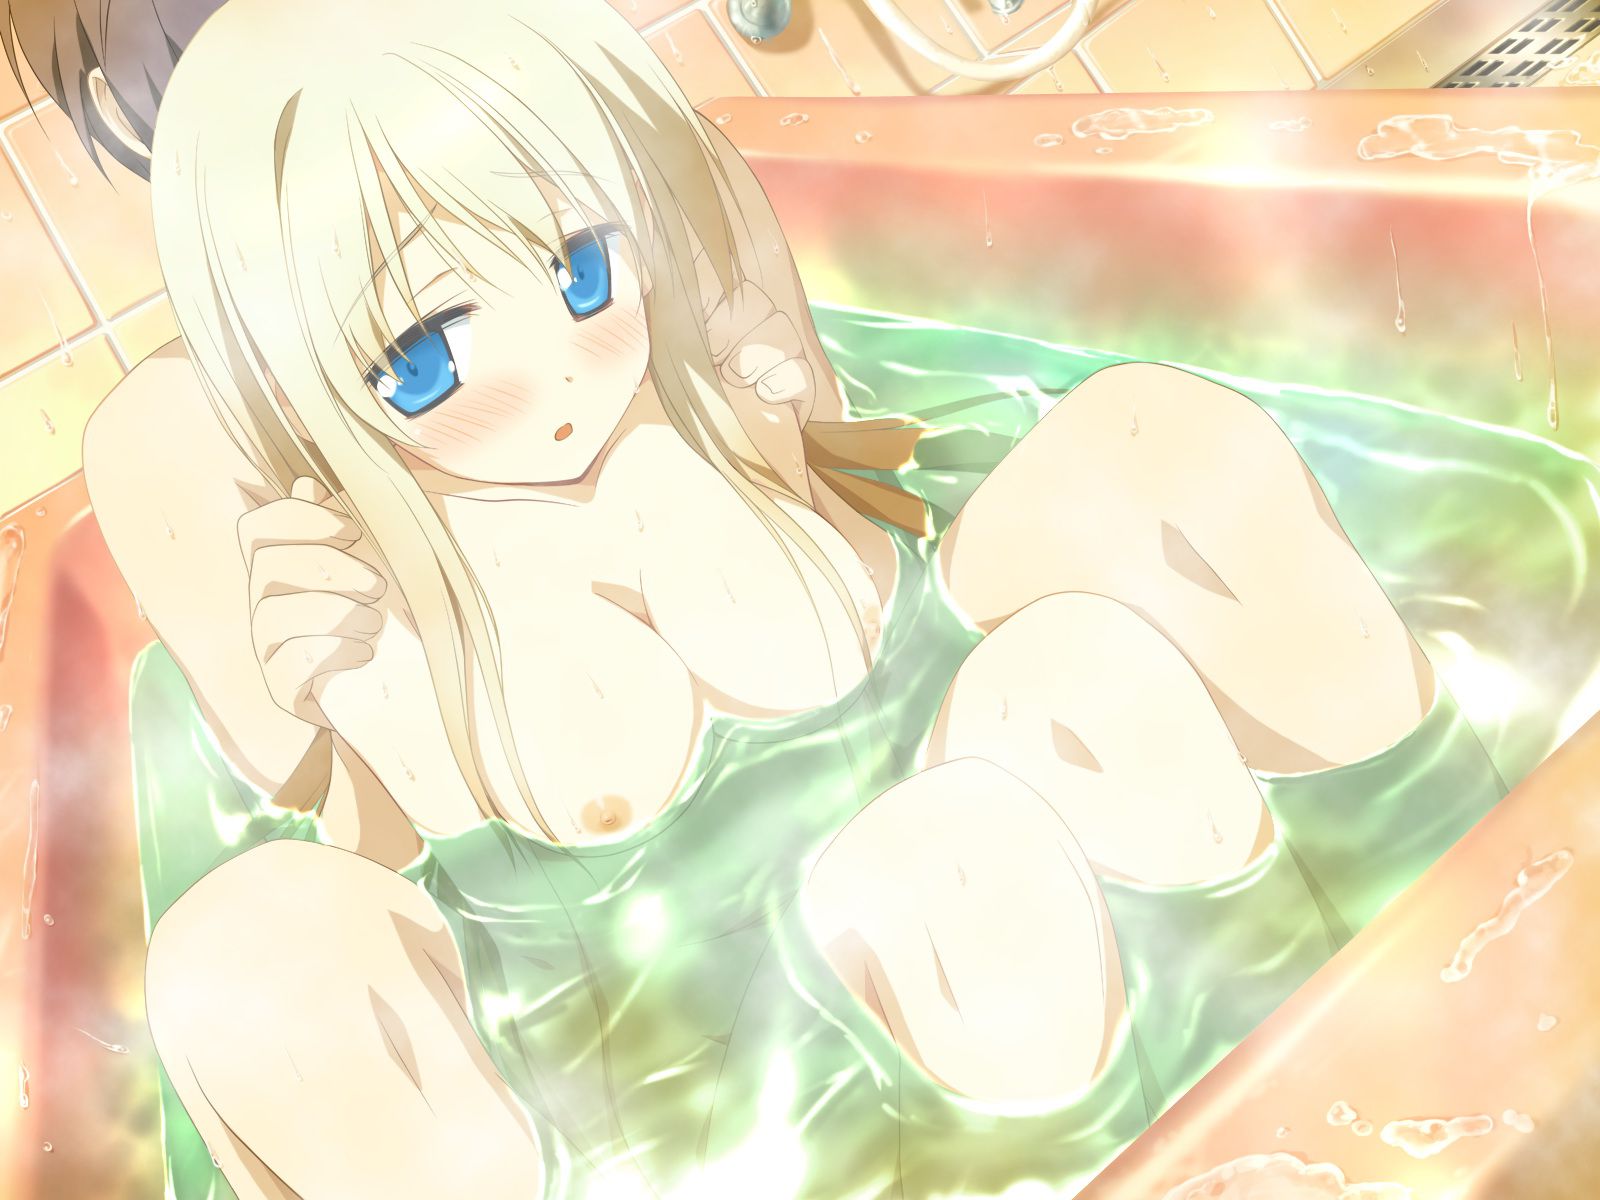 The too erotic bath scene in the bath is 2 girls pictures naked hot wwwwwww 1